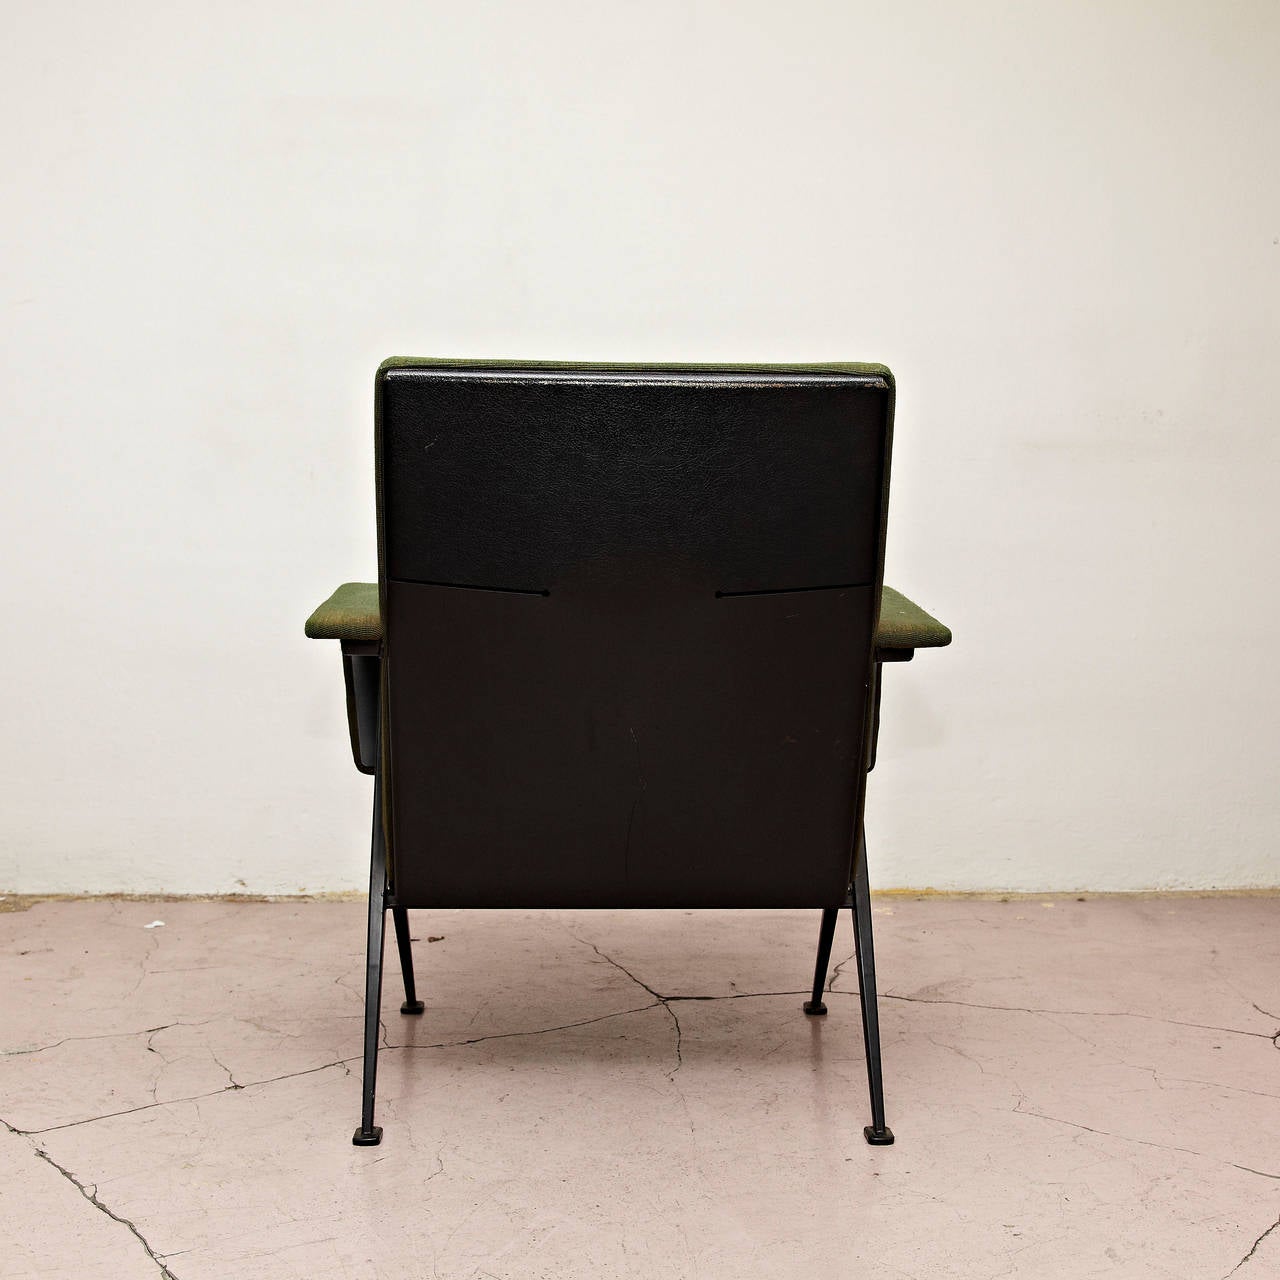 Fauteuil, model Repose, designed by Friso Kramer in 1960.
Manufactured by De Cirkel (Netherlands) the 9th of January of 1969.
Enameled folded sheet metal frame with upholstered armrests, metal seat and backrest, deep foam rubber upholstered in